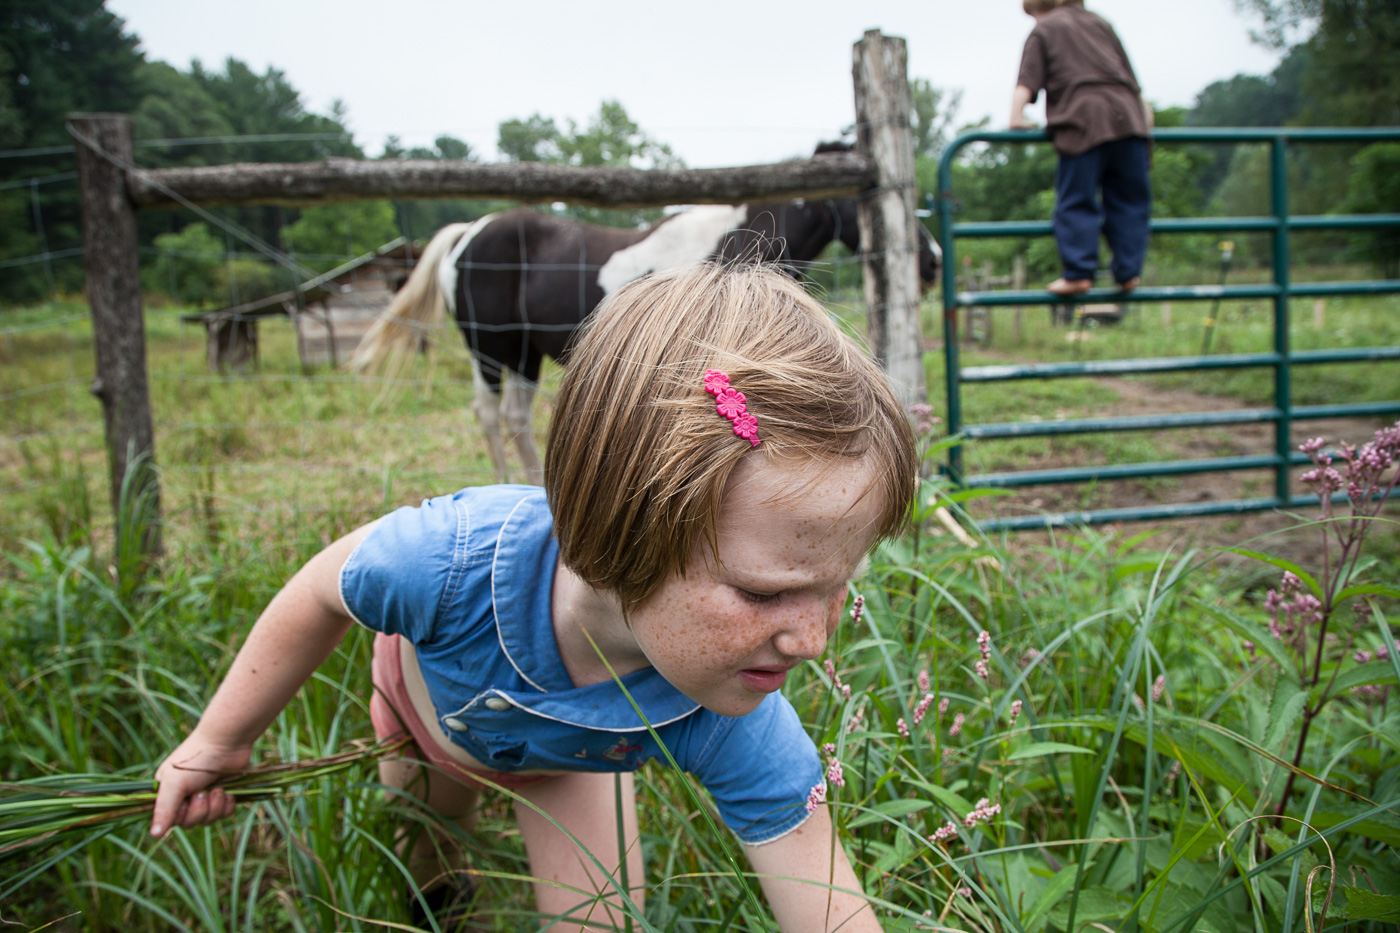 Sara Stathas portrait photographer - a young farm girl plays in the pasture